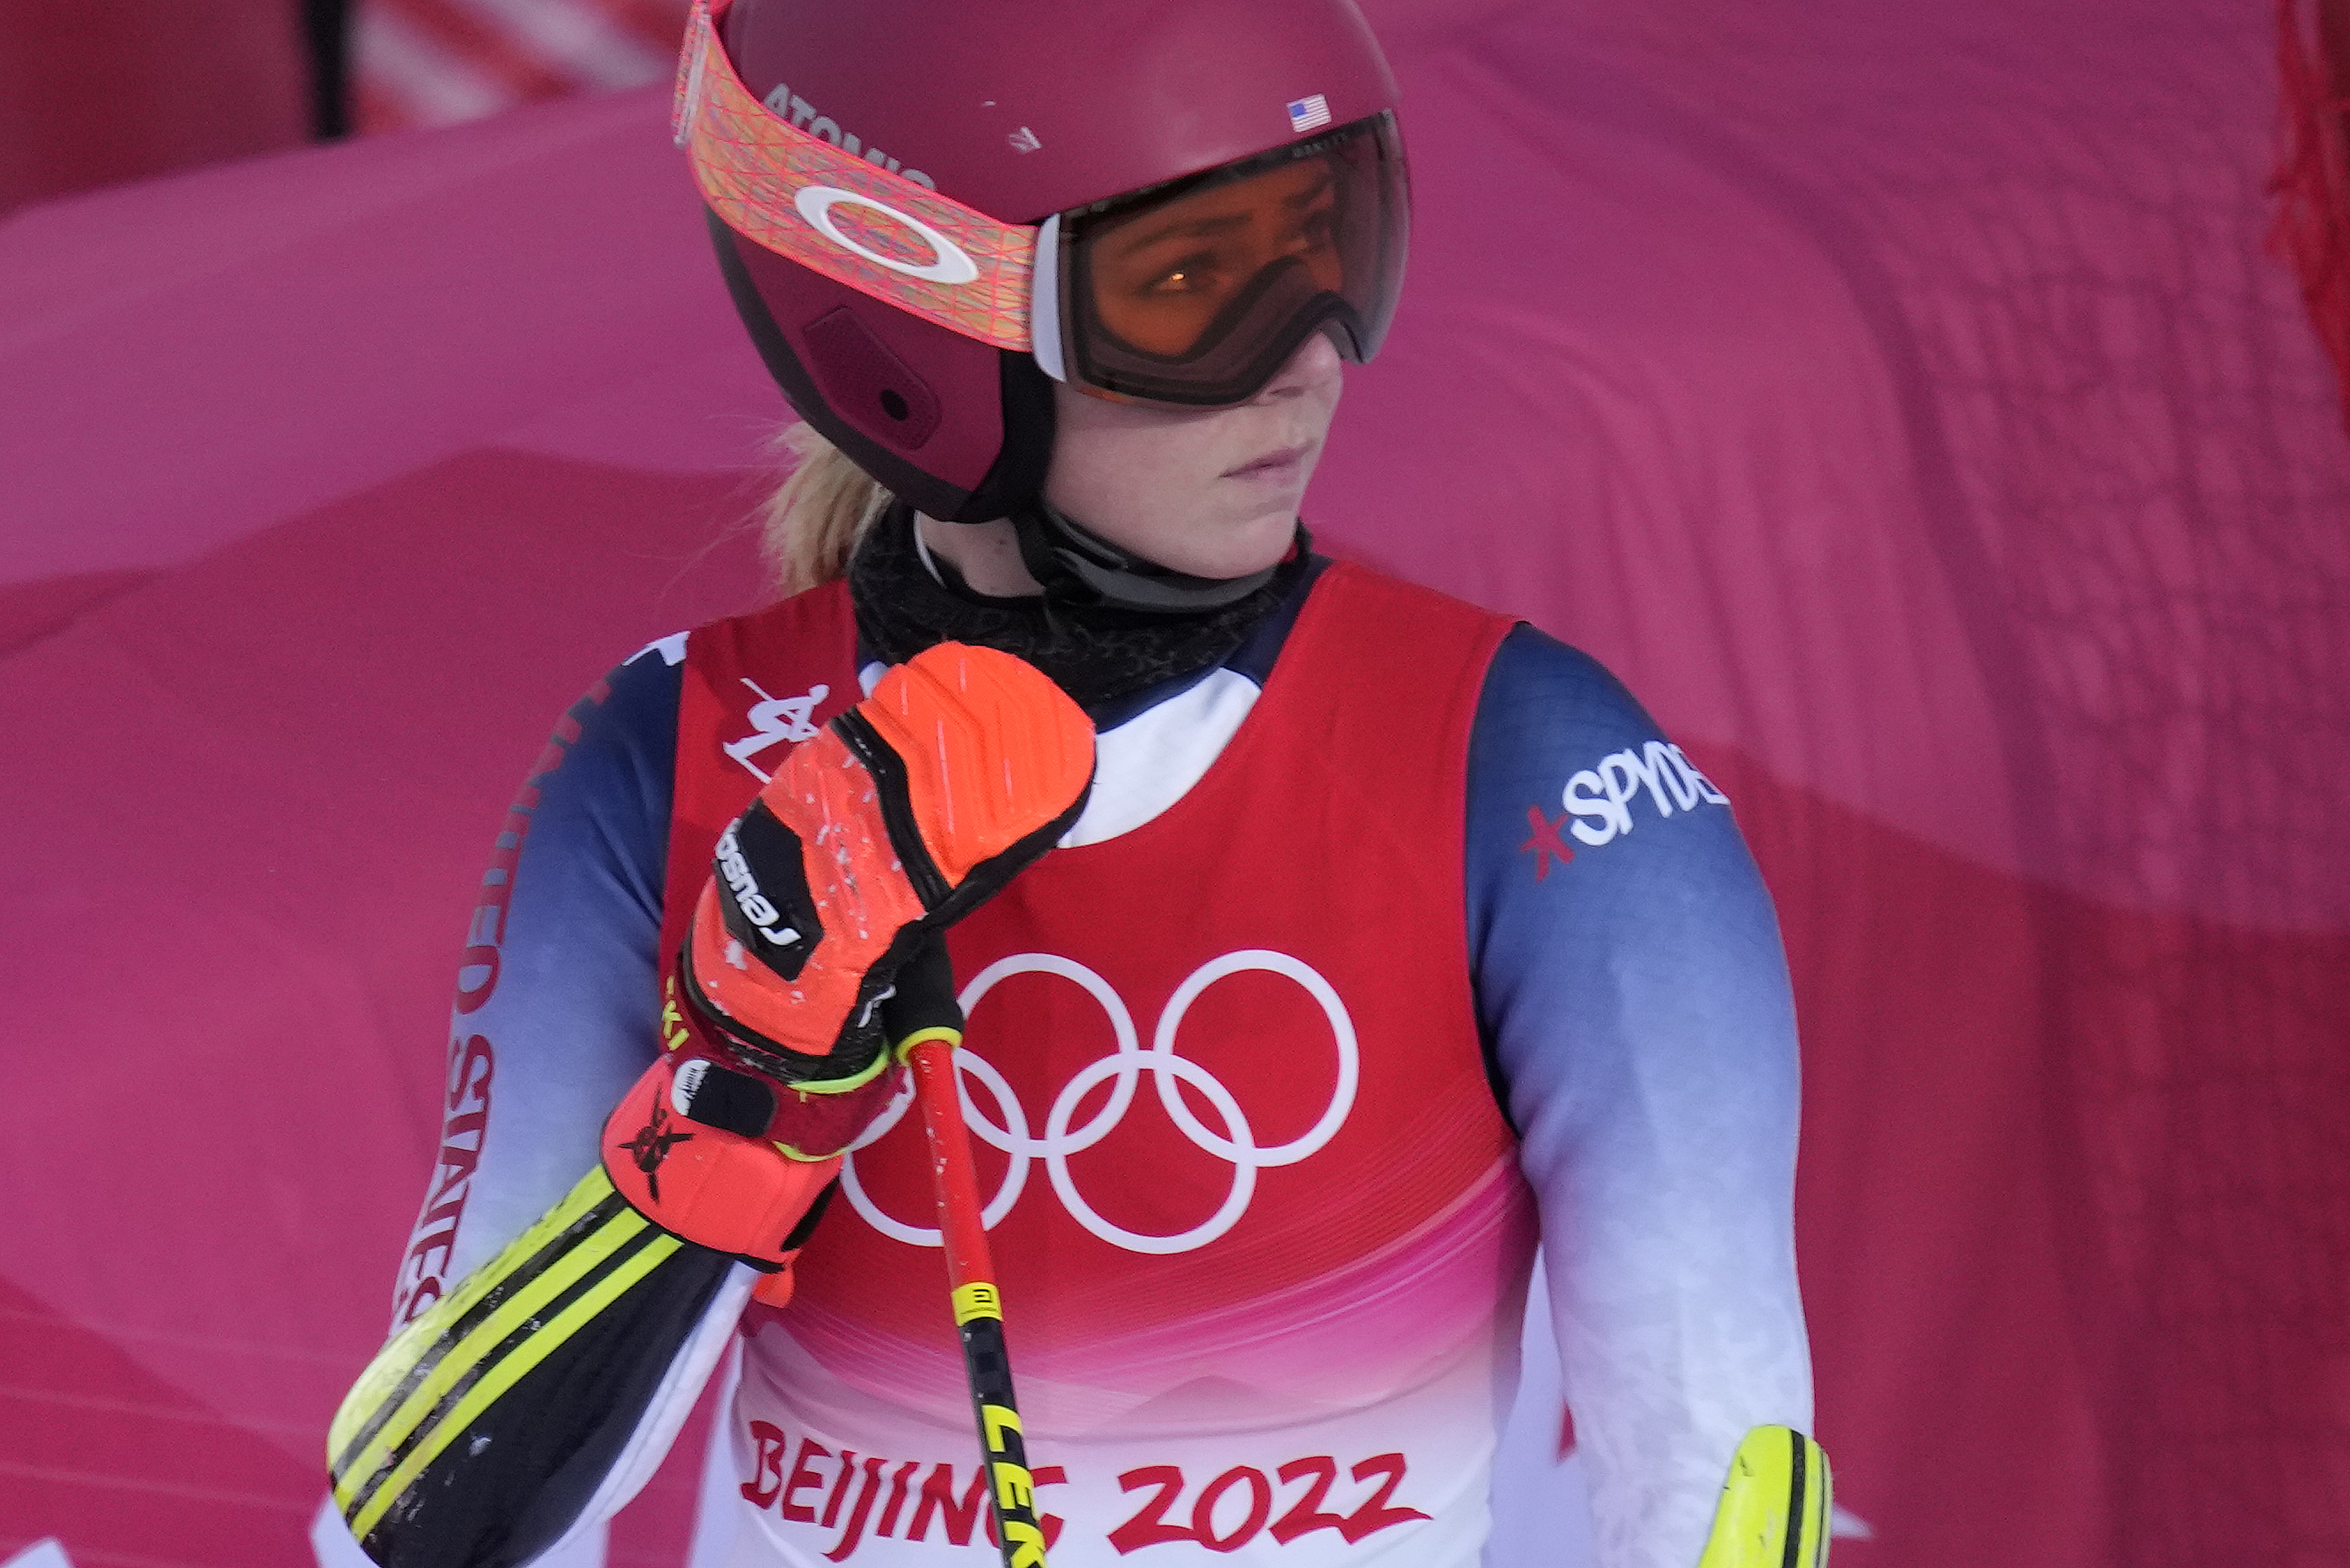 What to Know About Mikaela Shiffrin Ahead of Tonights Slalom Event